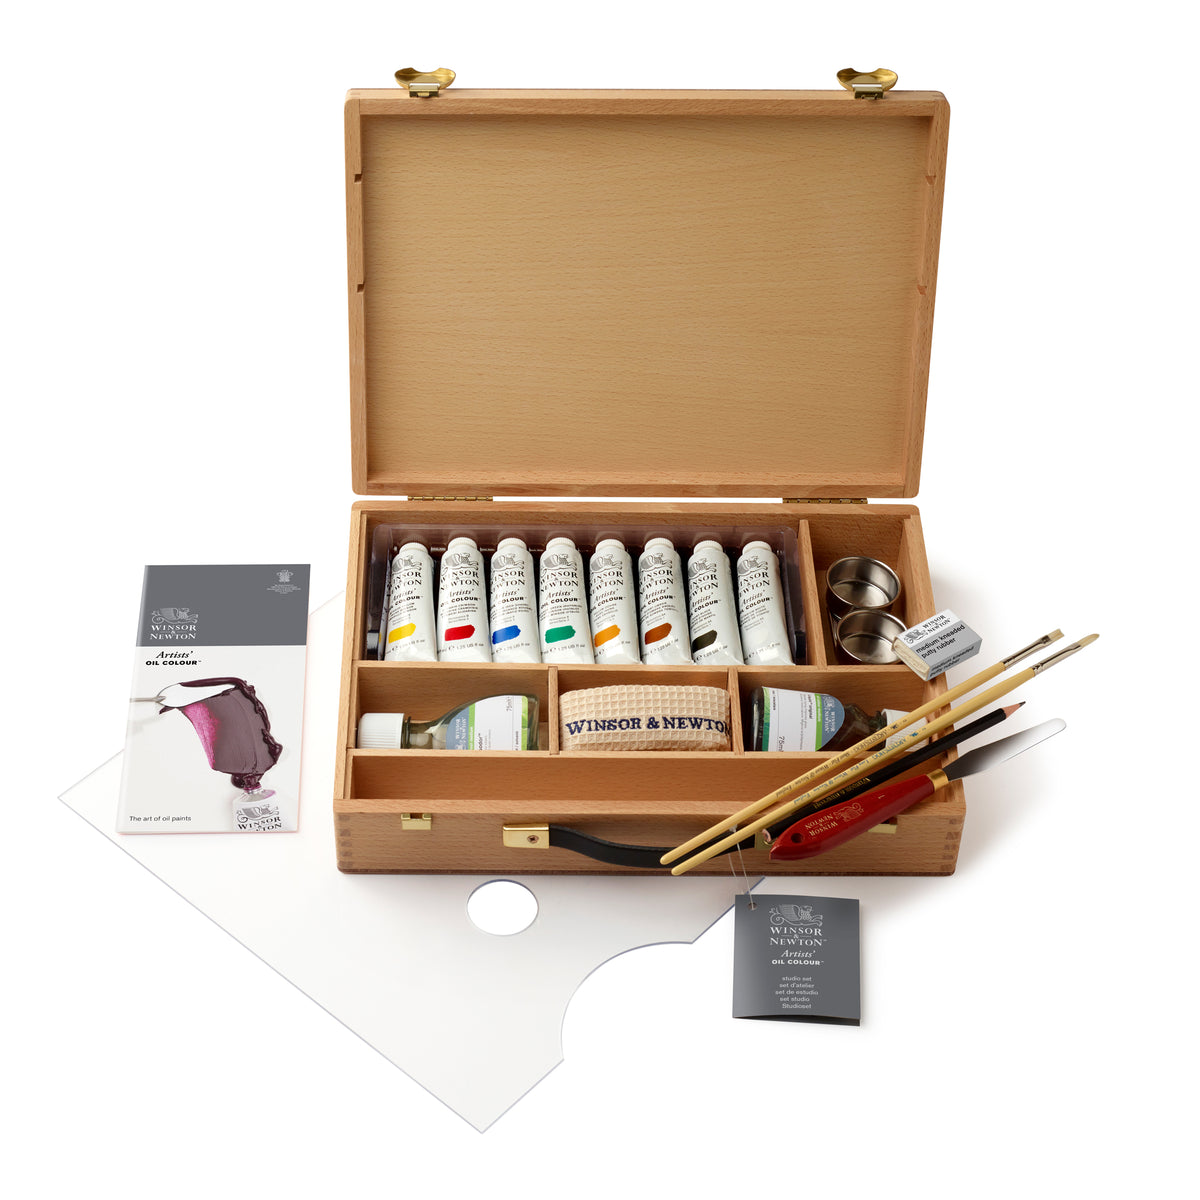 W&amp;N Artists Oil Tube Bamboo Travel Box - Free Palette Knife Set of 5 (Normally £9.85)